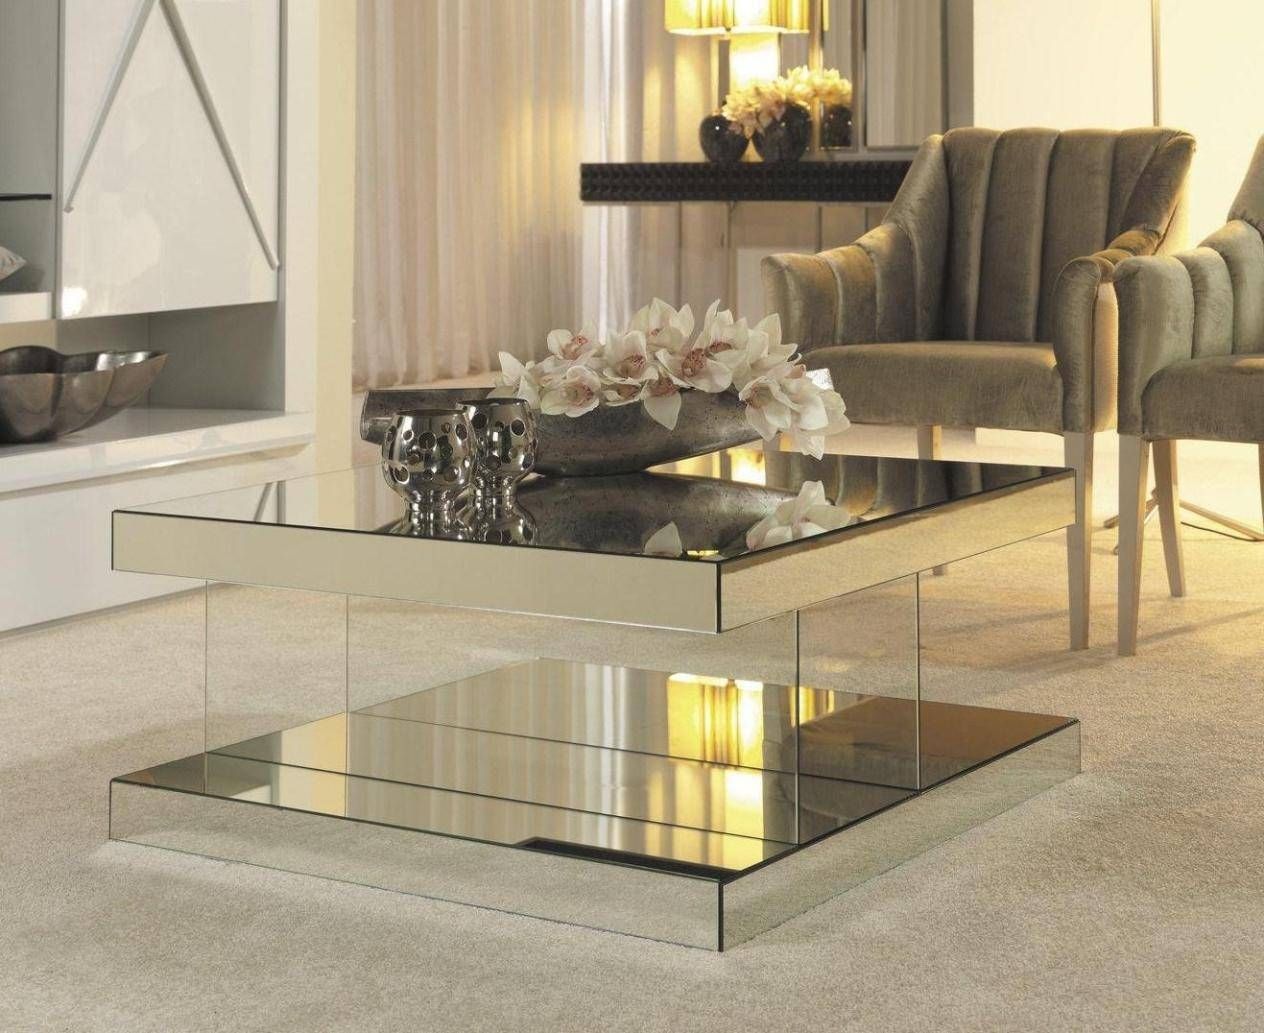 Mirrored Coffee Tables – Small Mirrored Coffee Tables, Mirrored Pertaining To Small Mirrored Coffee Tables (View 1 of 30)